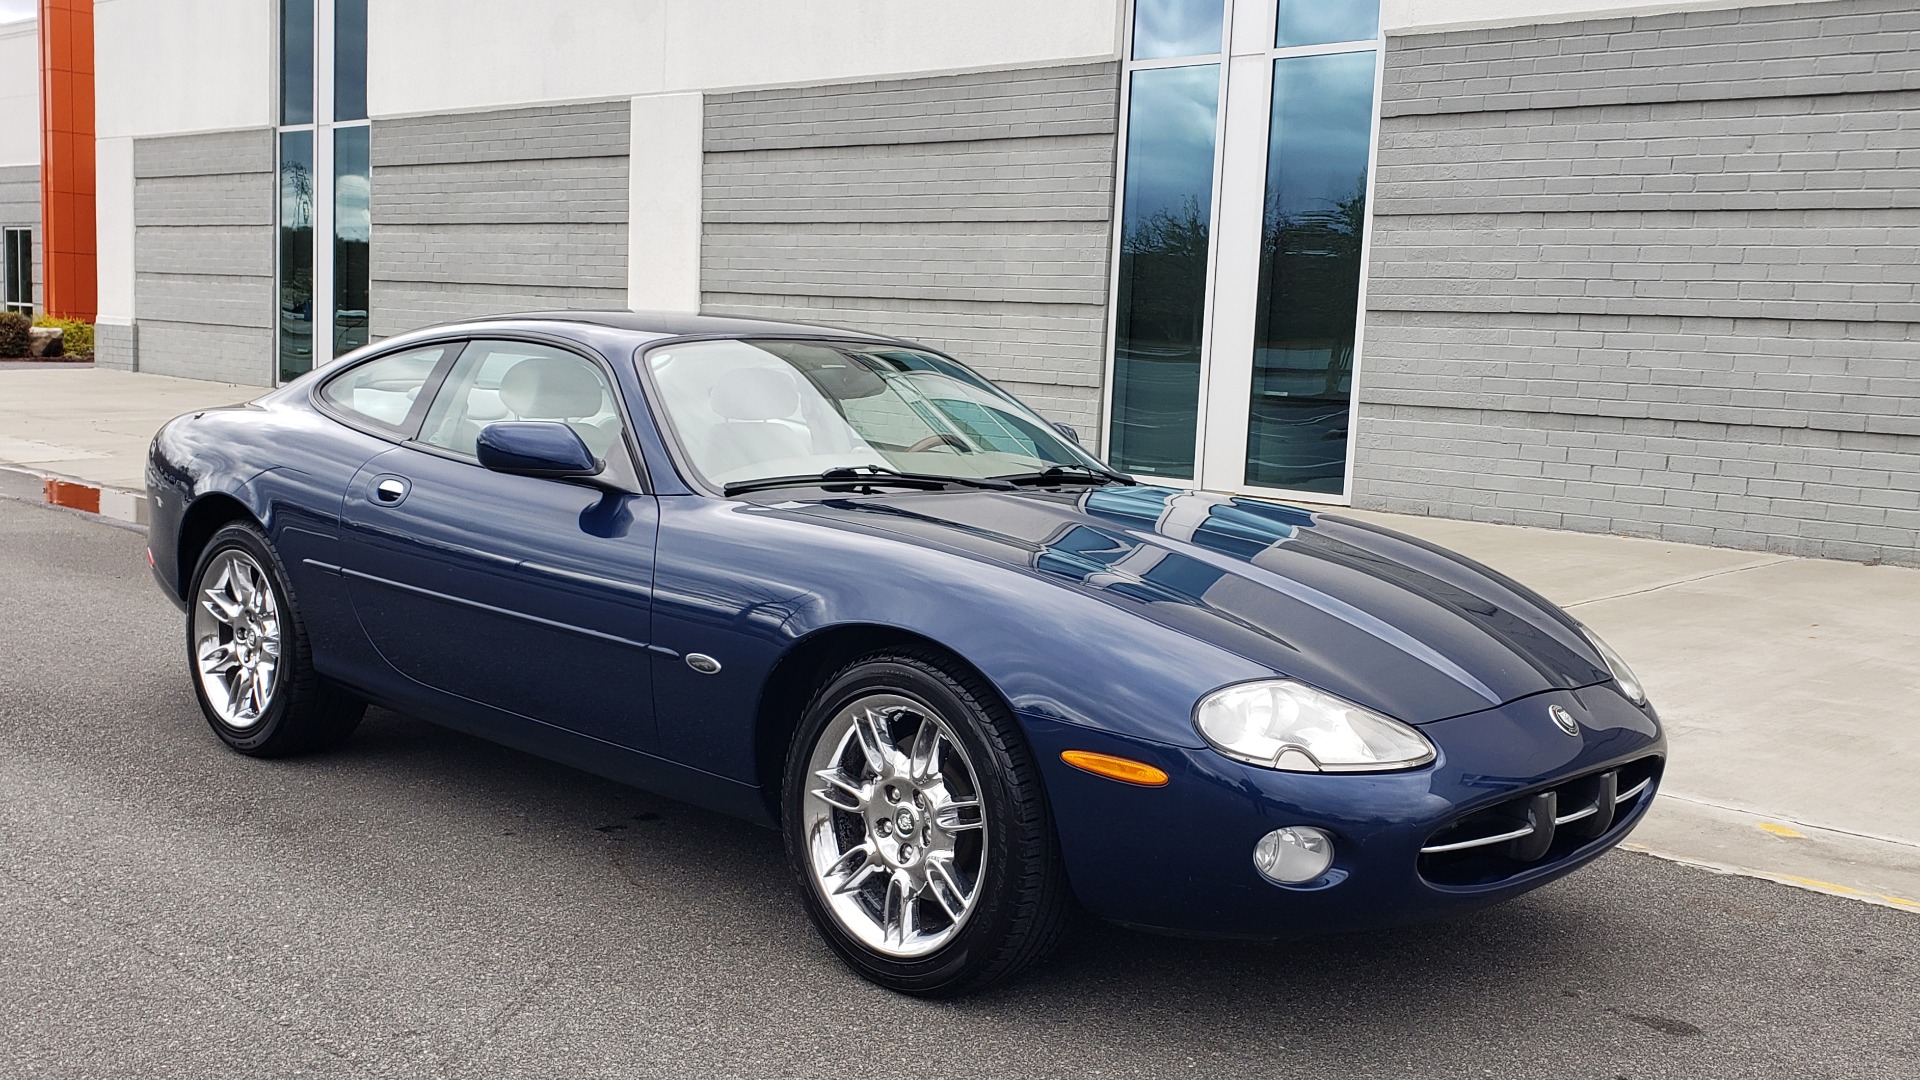 Used 2002 Jaguar XK8 COUPE / 4.0L V8 / 5-SPD AUTO / ALPINE SOUND / 18IN CHROME WHEELS for sale Sold at Formula Imports in Charlotte NC 28227 12